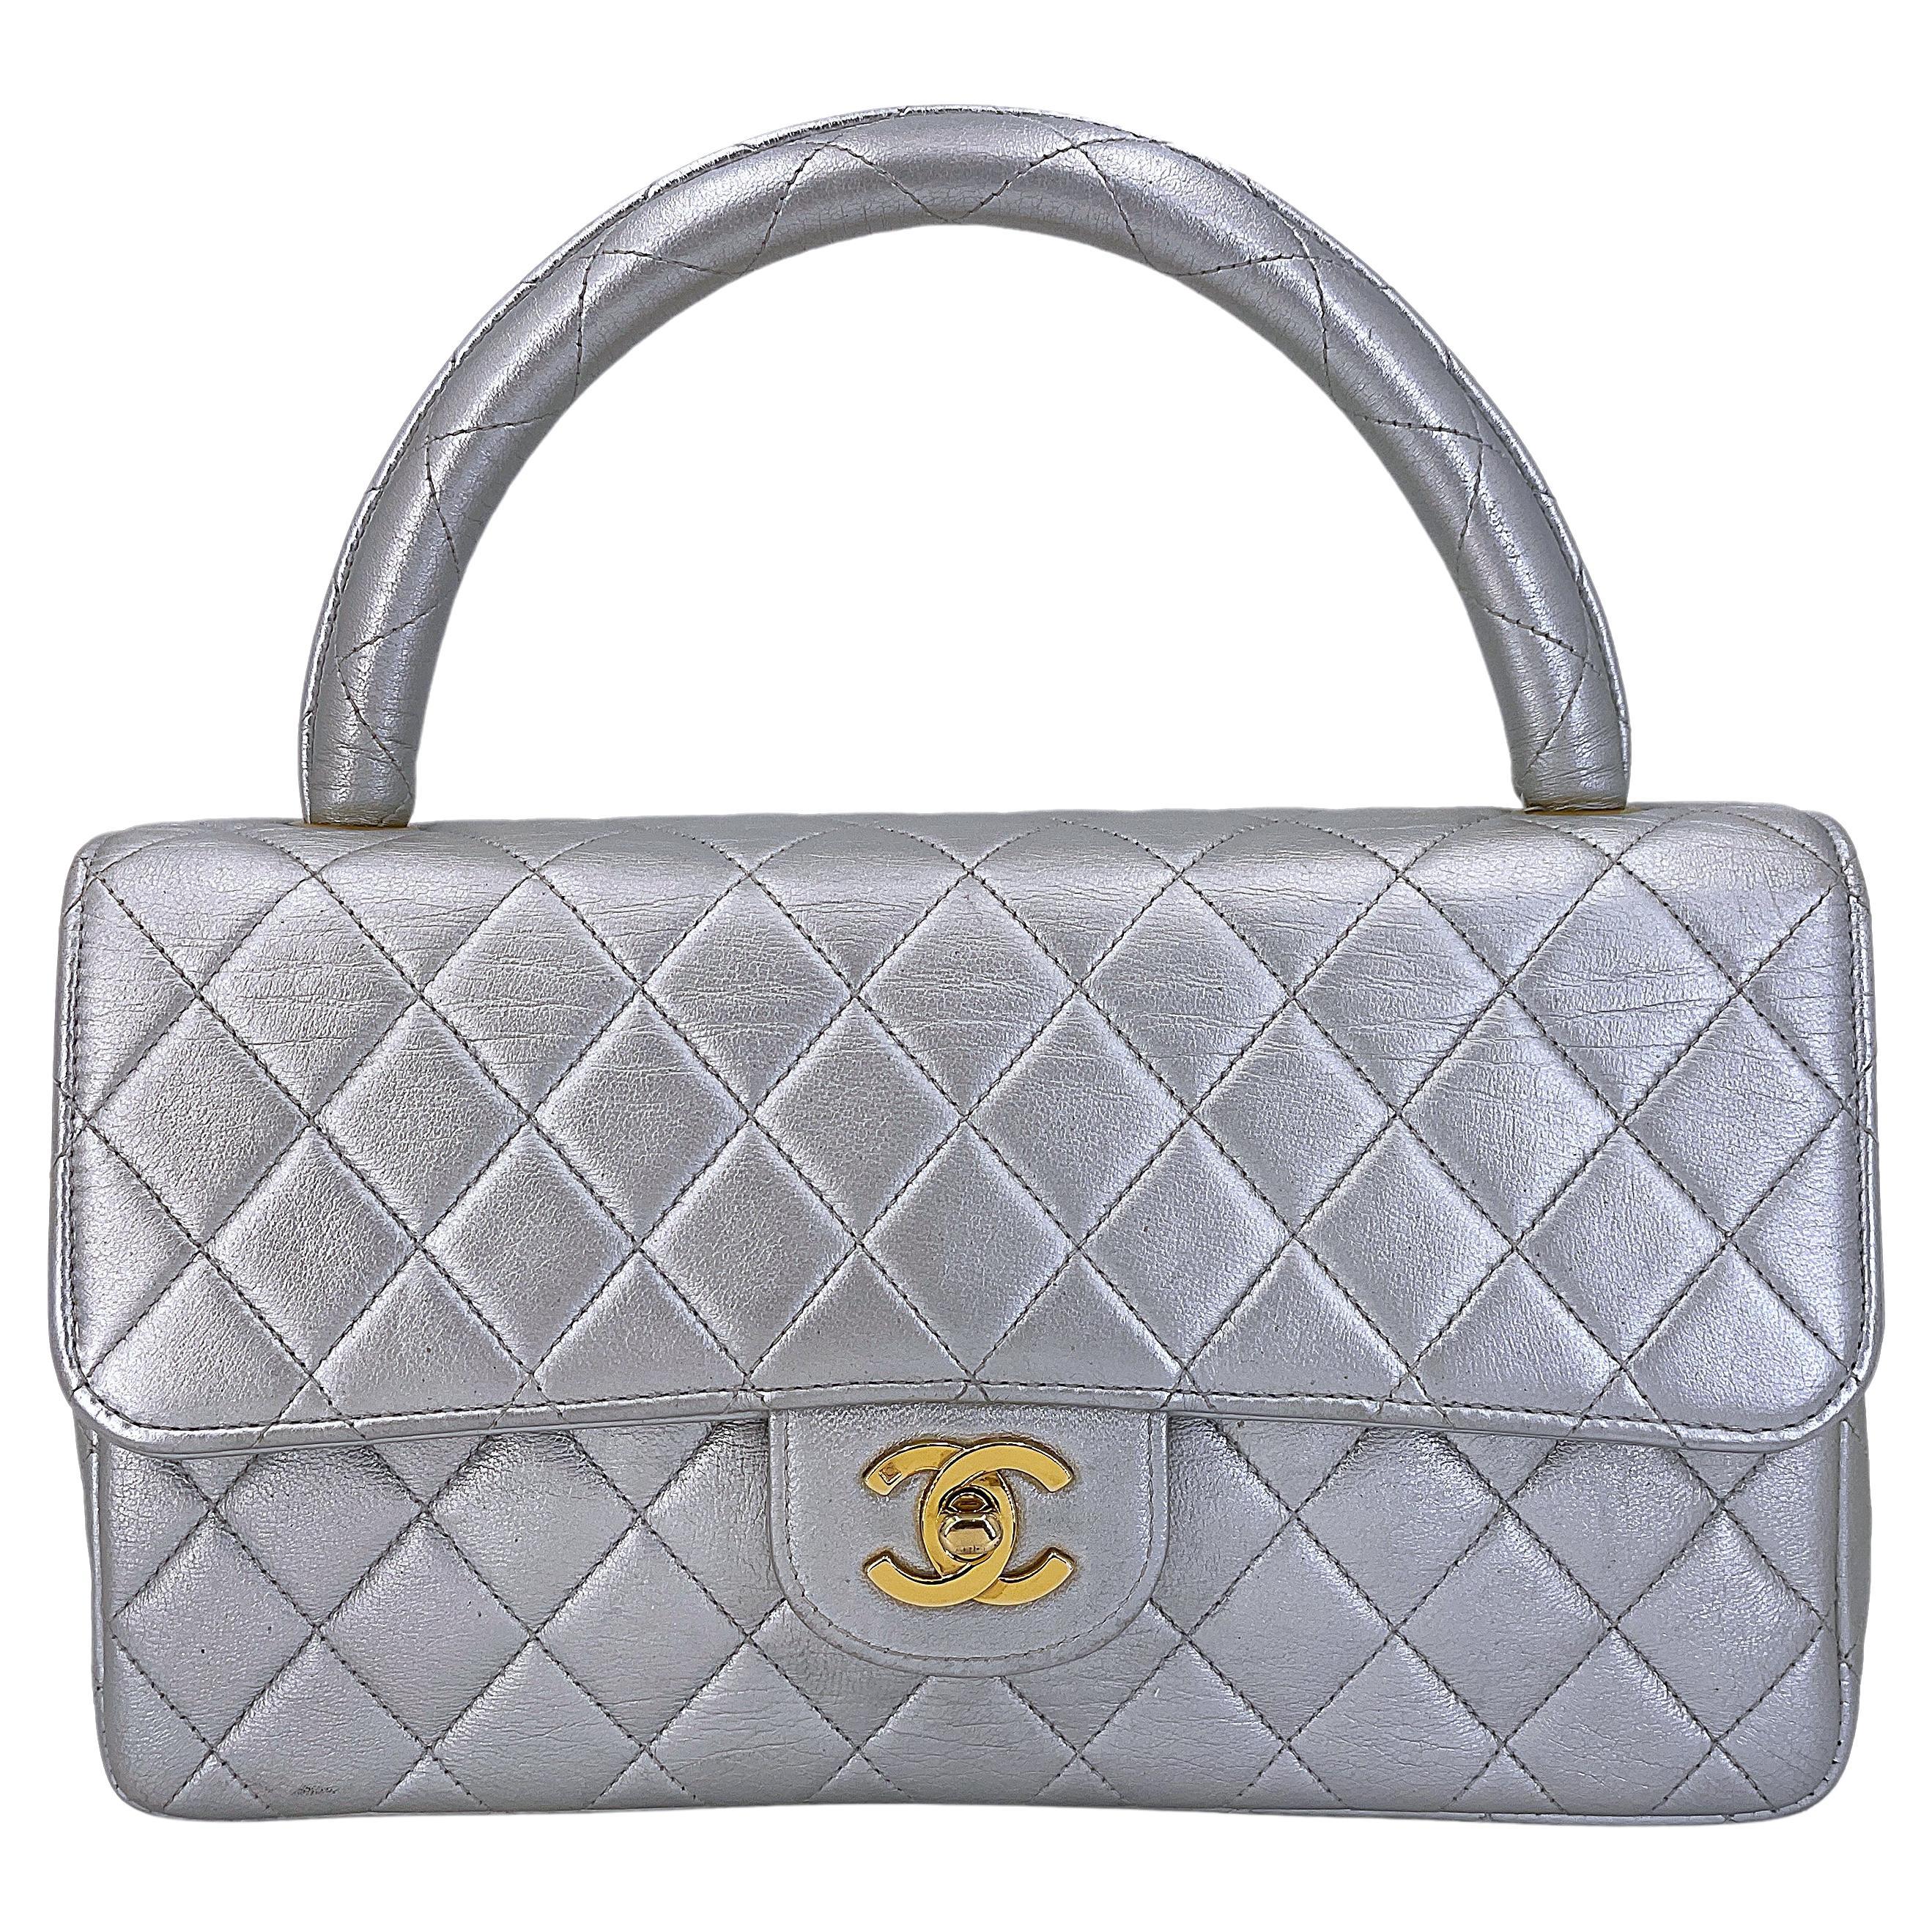 chanel flap bag with top handle sizes